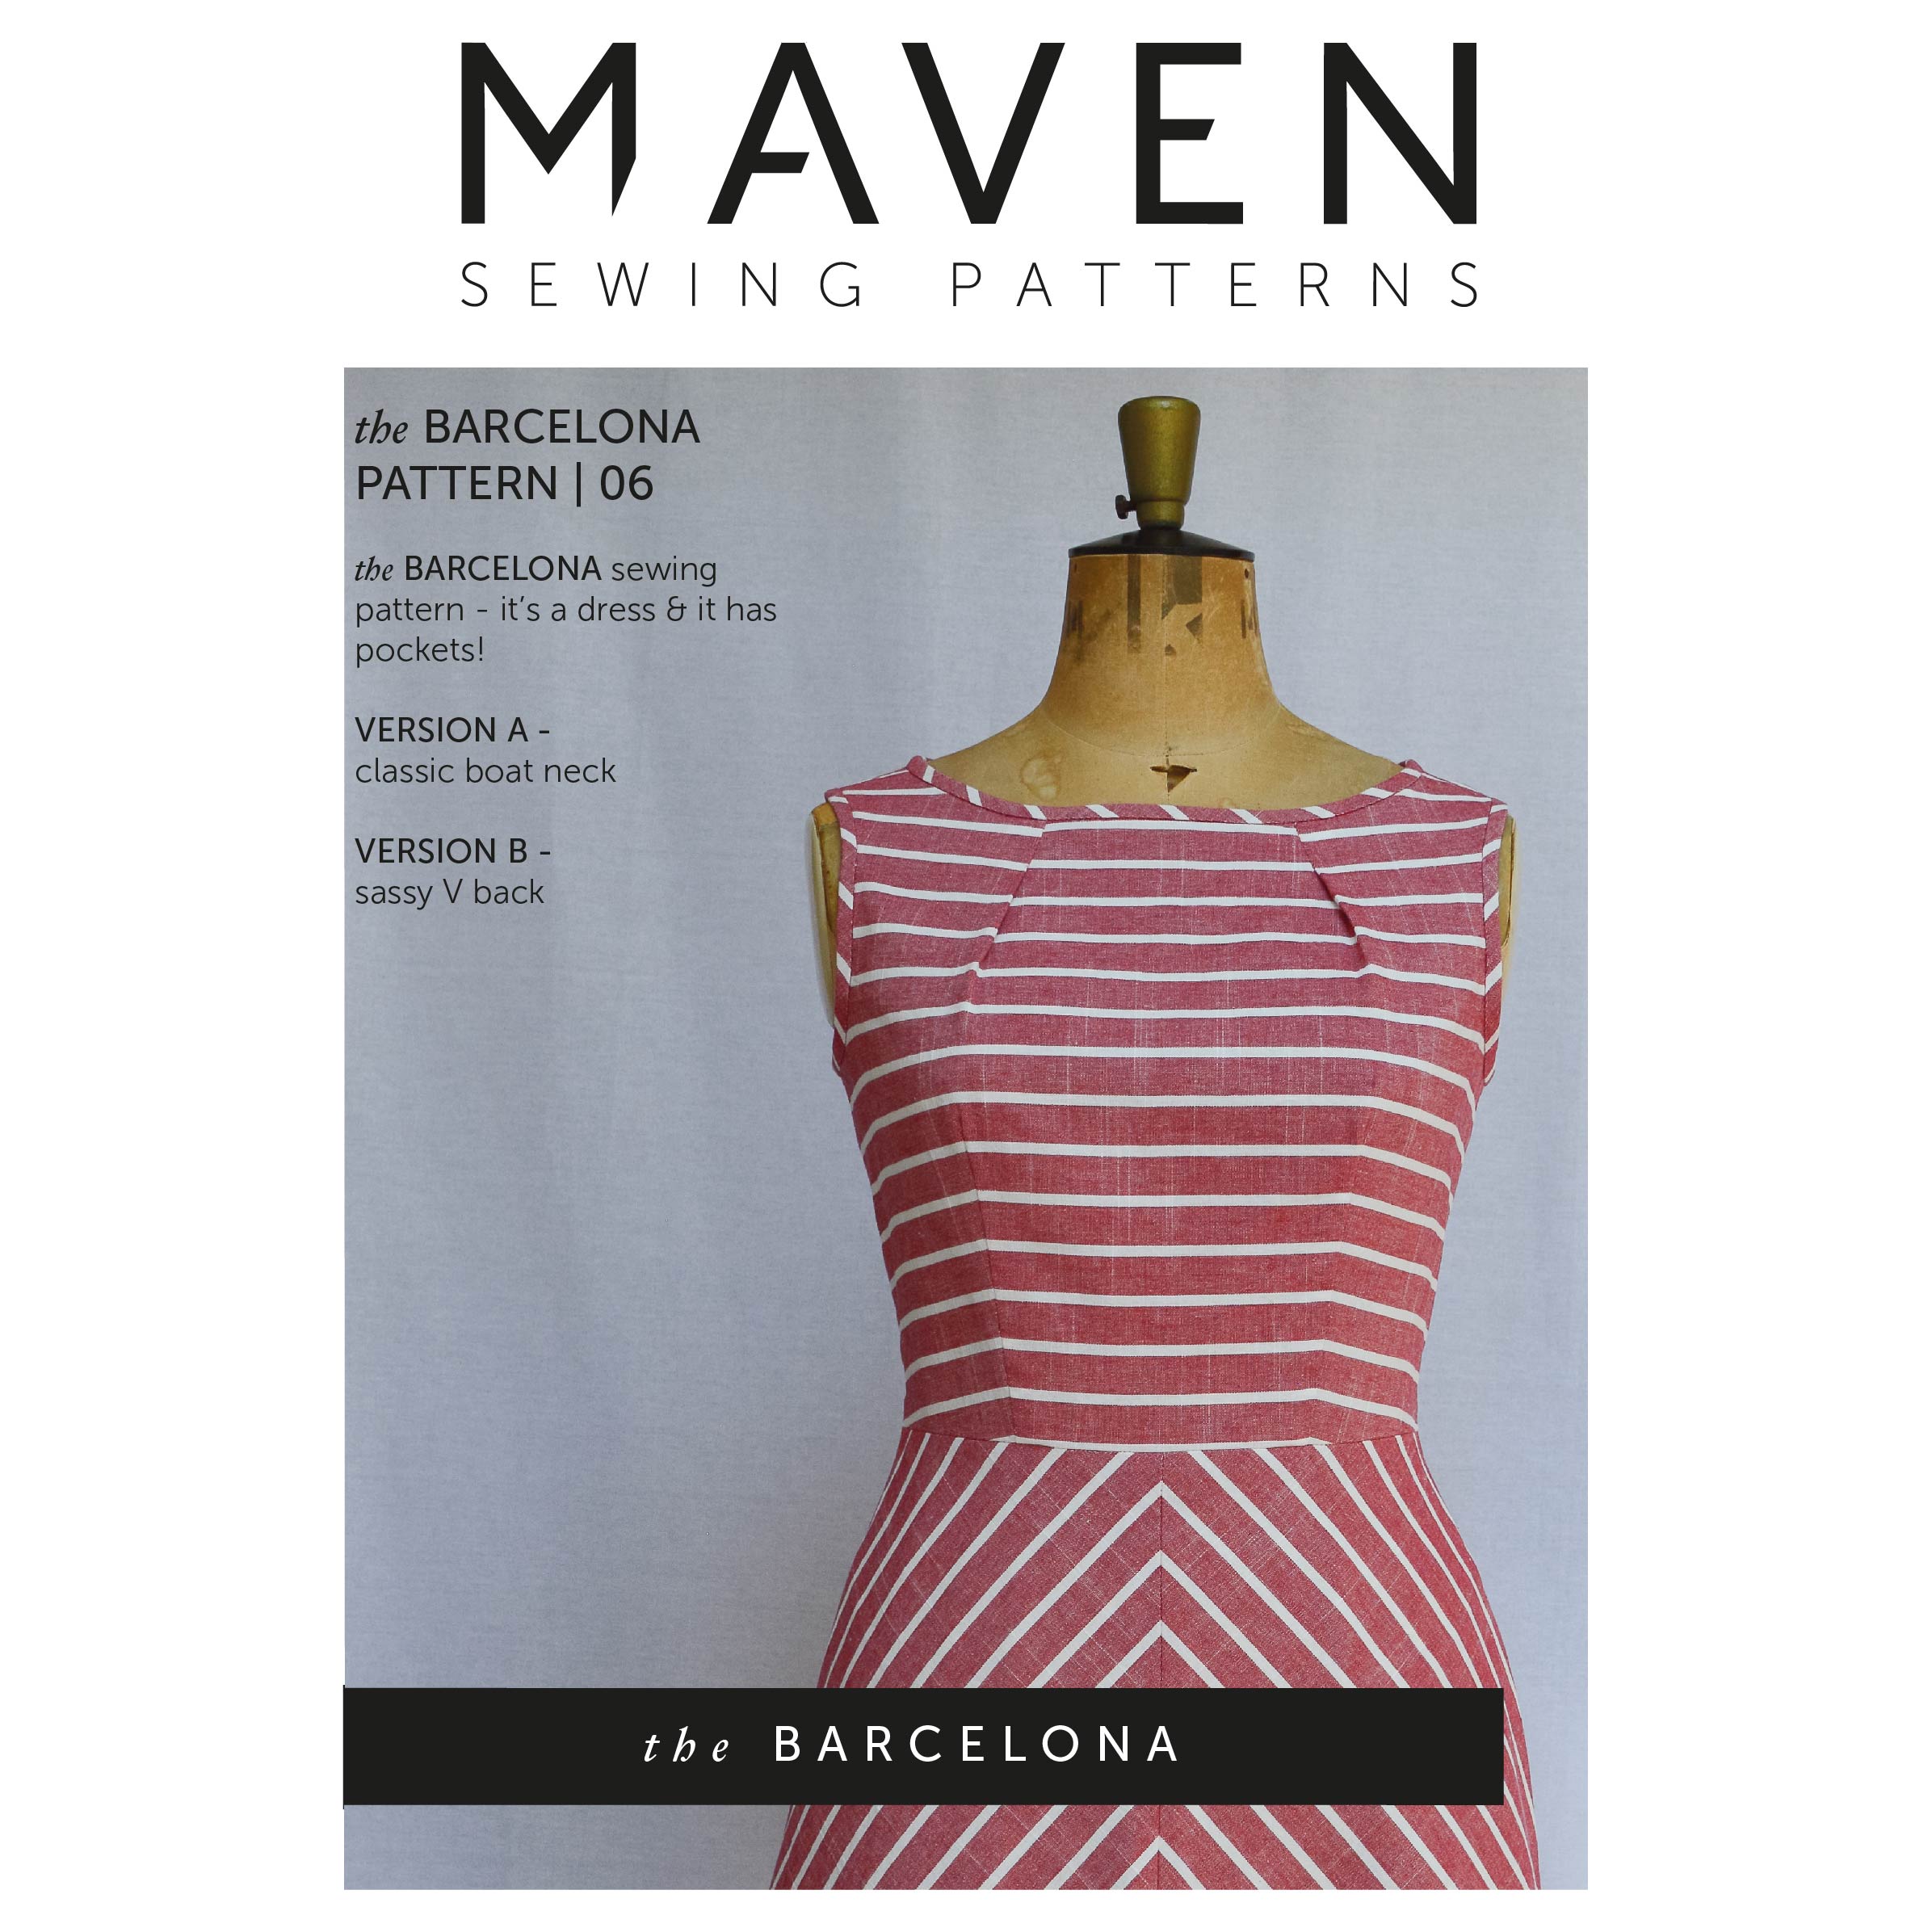 The Barcelona - Sewing Pattern | Maven